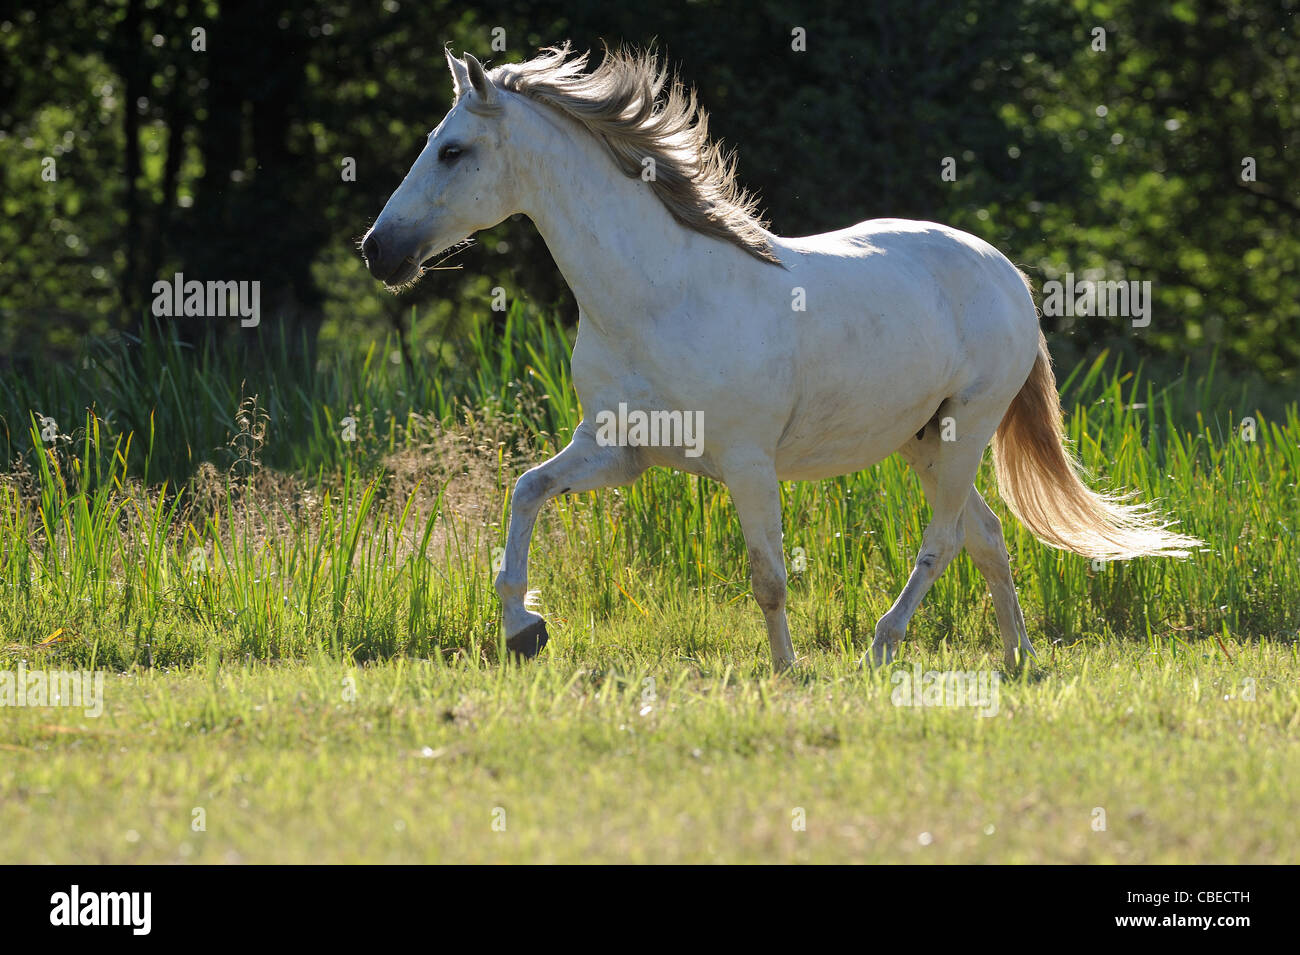 Andalusian Horse (Equus ferus caballus). Gray mare in a trot on a meadow. Stock Photo